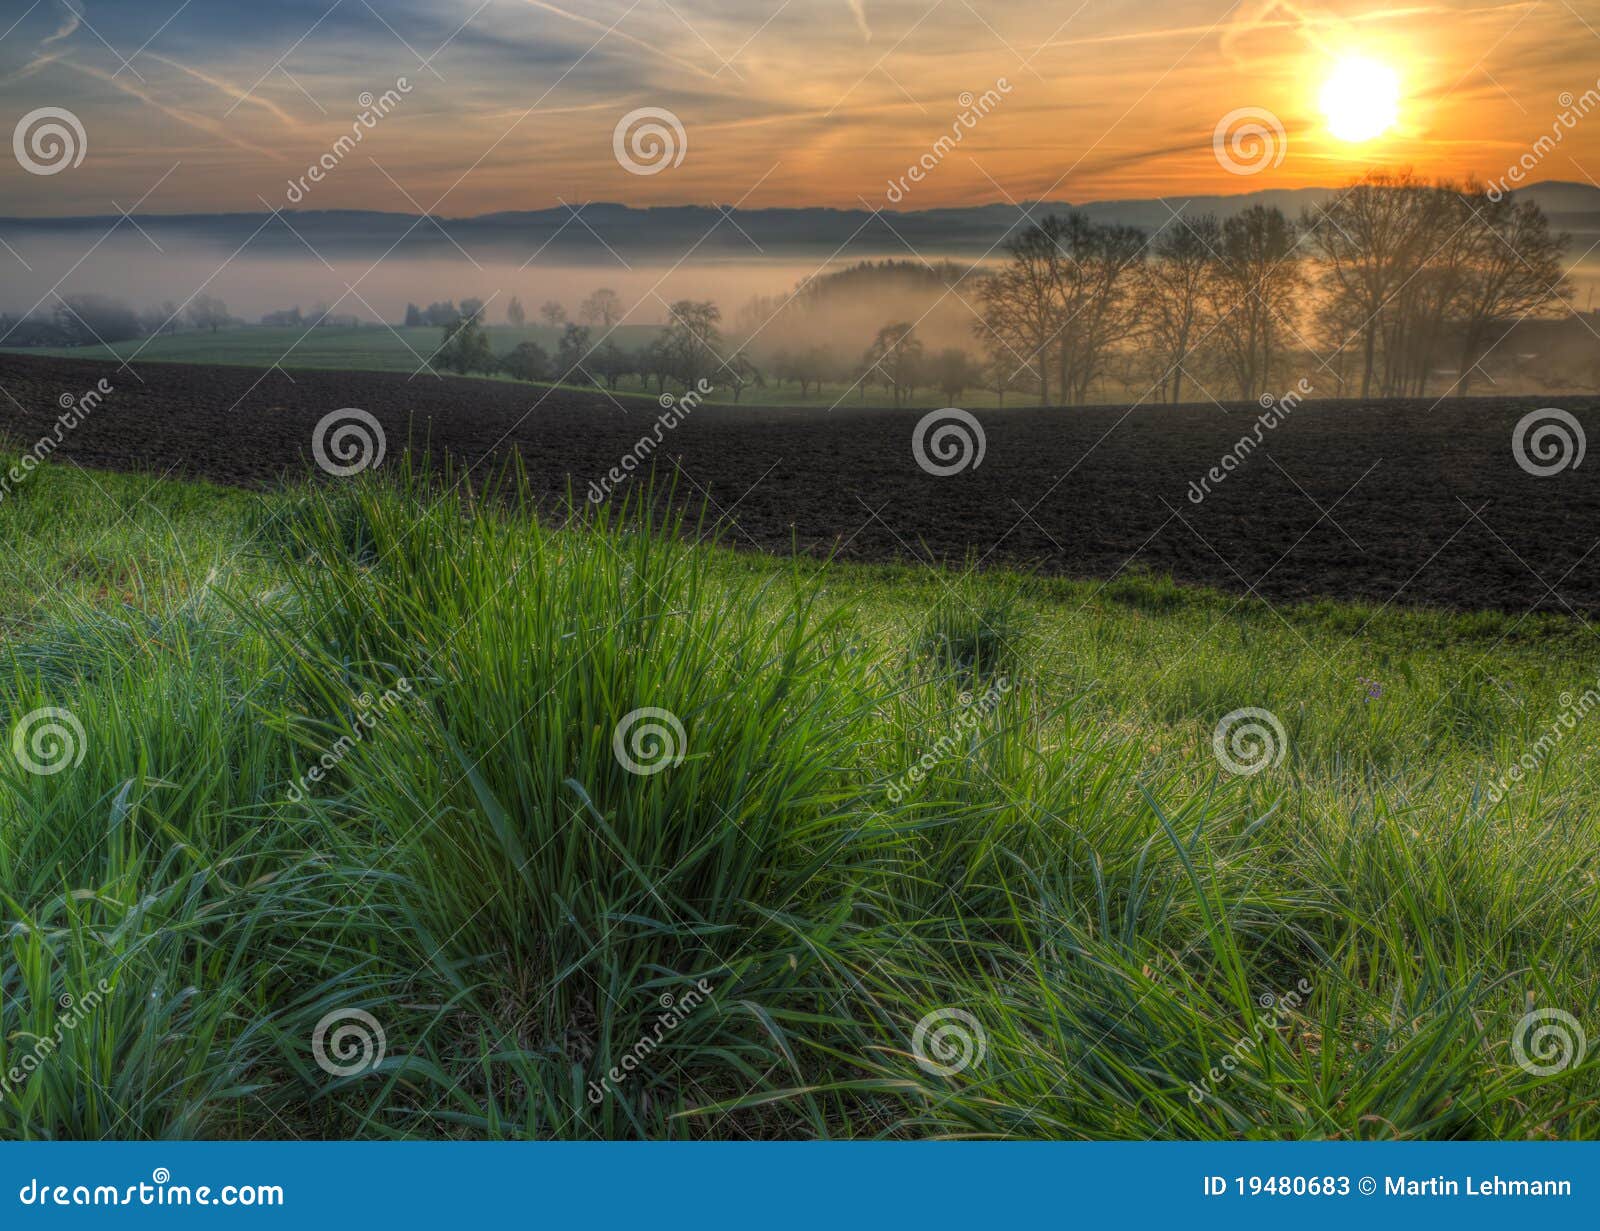 Dewy Grass At Sunrise With Fog Stock Image - Image of quiet, natural